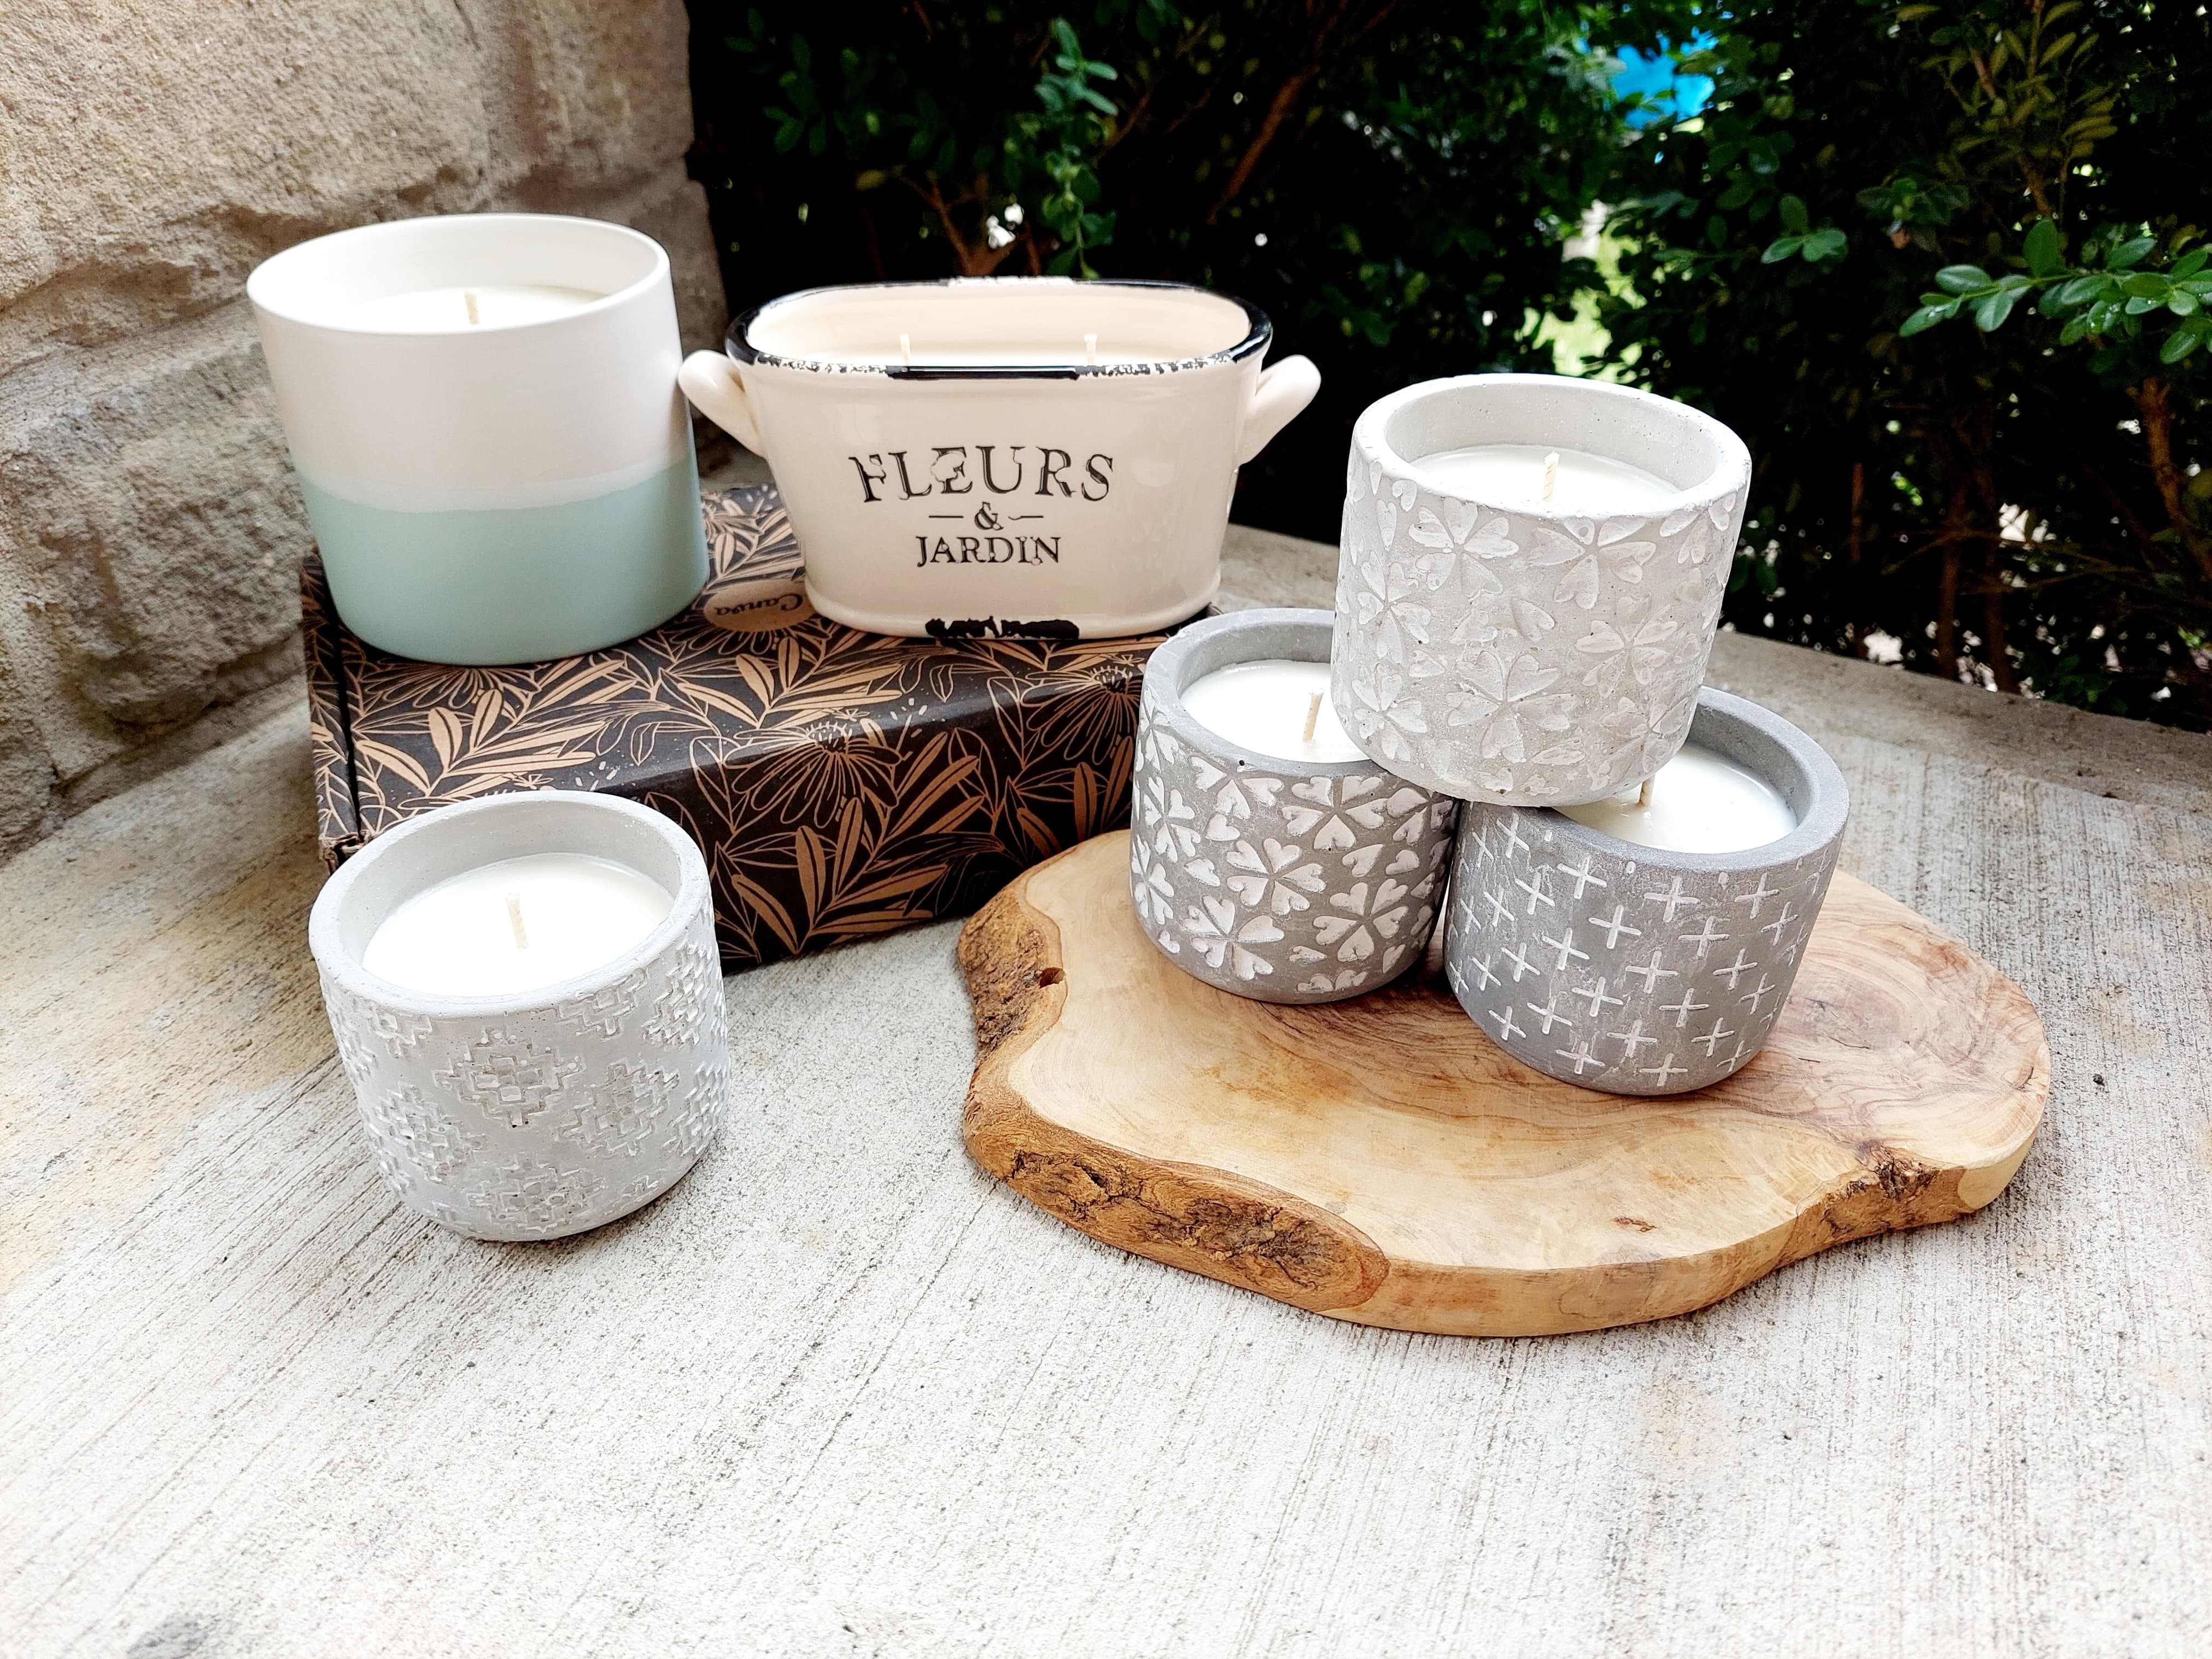 soy candles wax candle soy wax soy wax candles containers for candles natural candles all natural candles one candle reusable candles natural soy natural wax all about wax natural soy wax natural soy candles